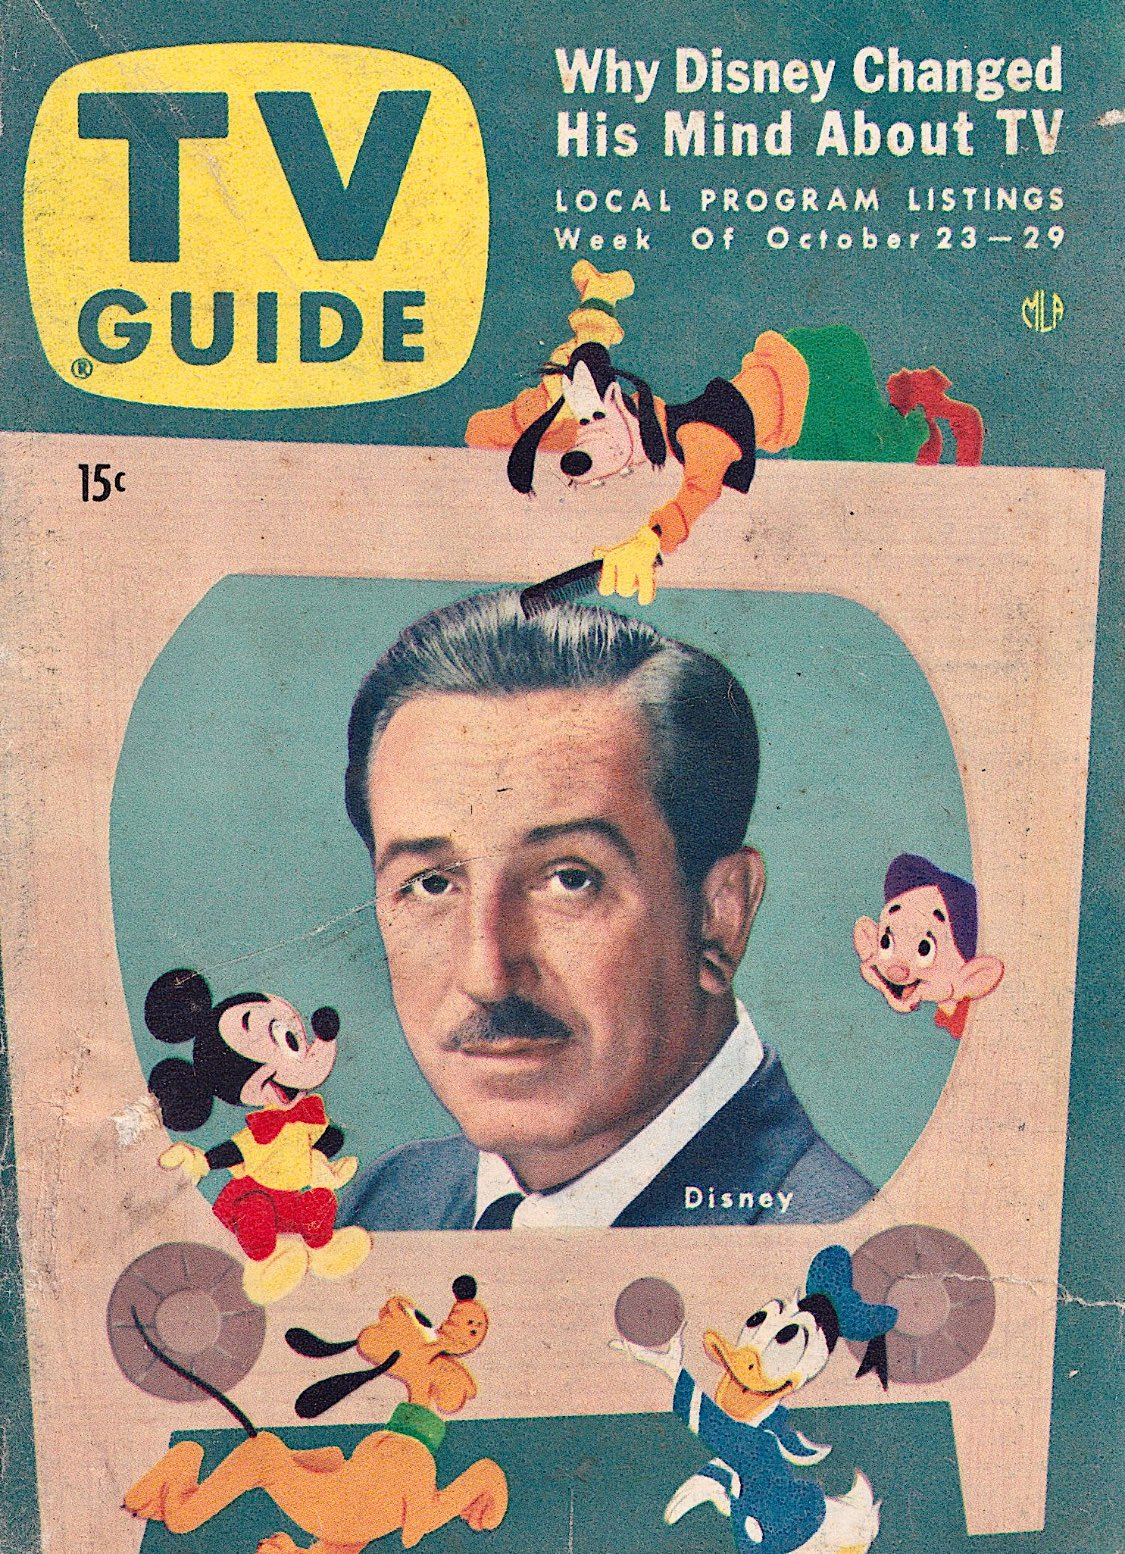 Walt Disney on the cover of TV Guide - October 23-29, 1954